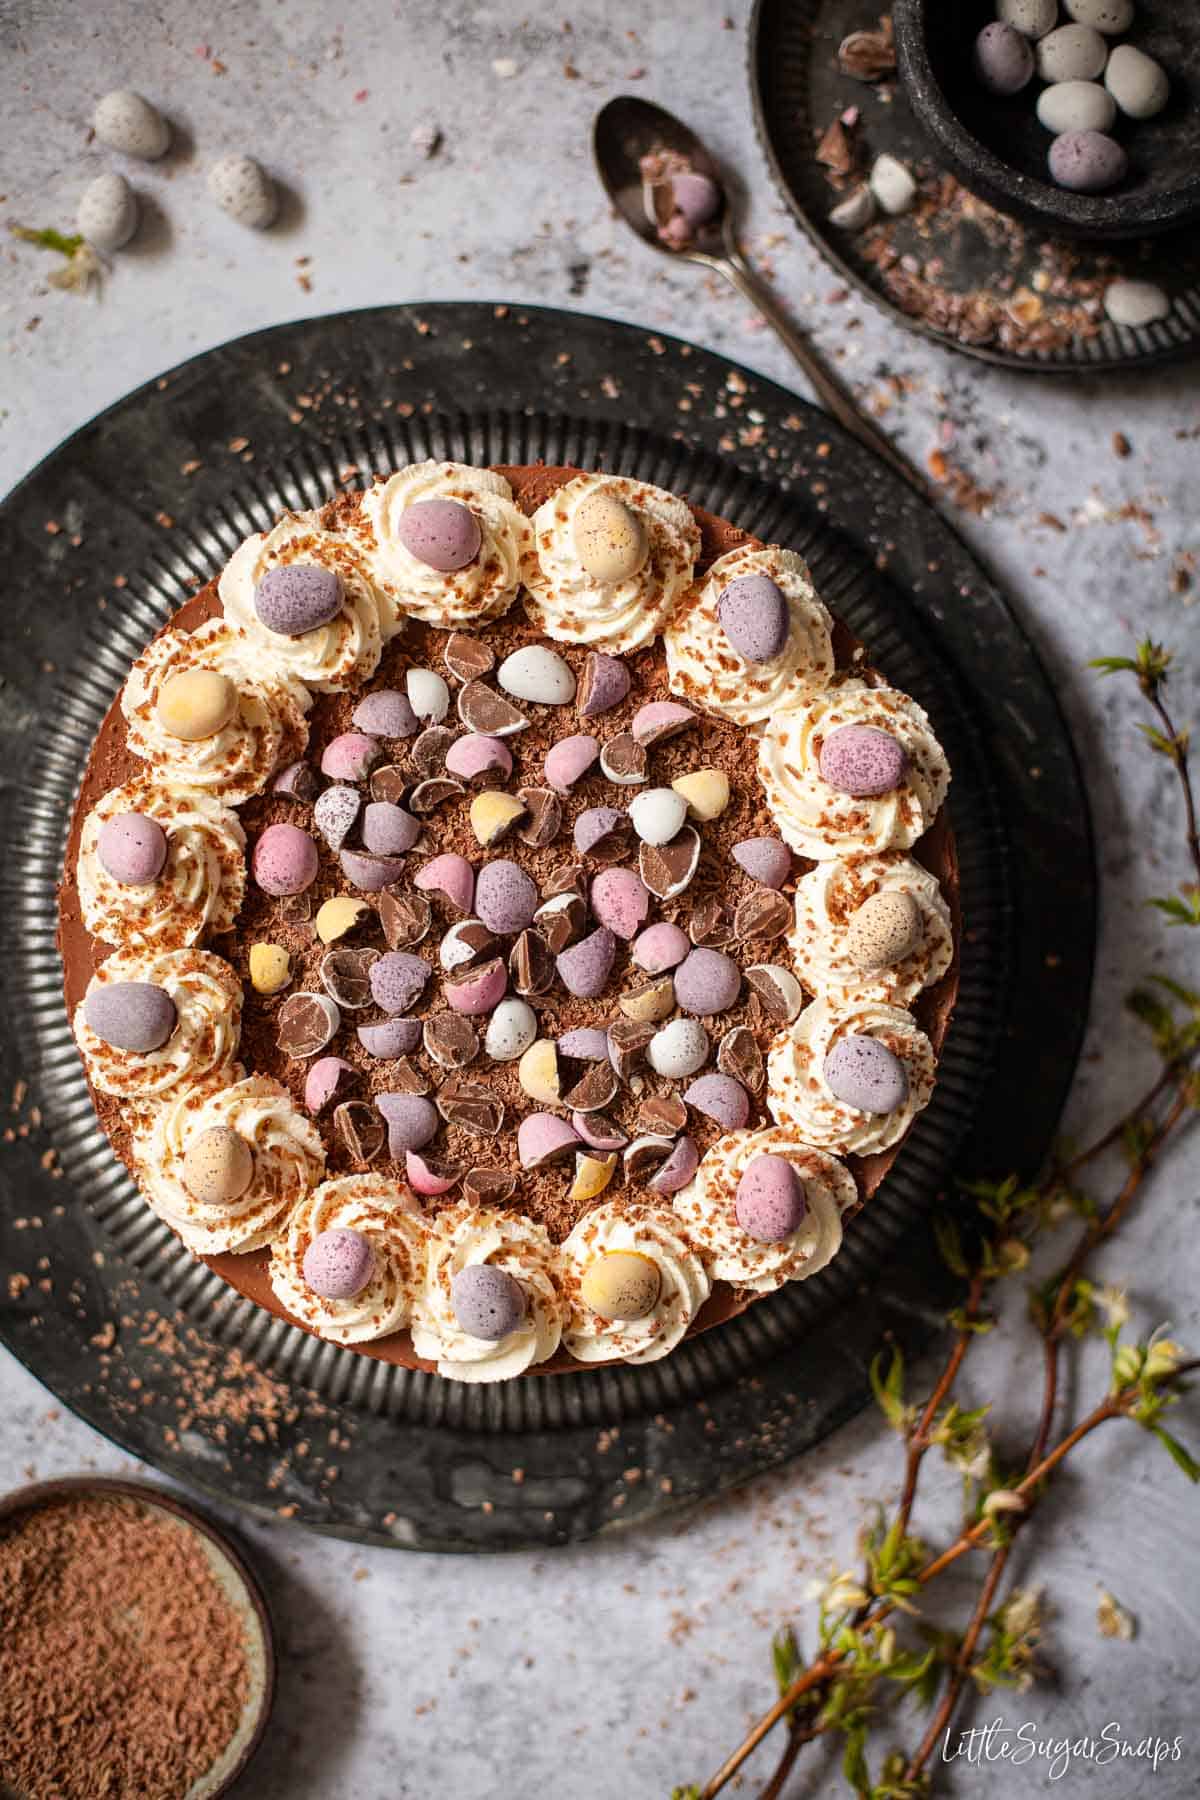 A no-bake Easter egg Cheesecake with whipped cream, chocolate flakes and candy eggs